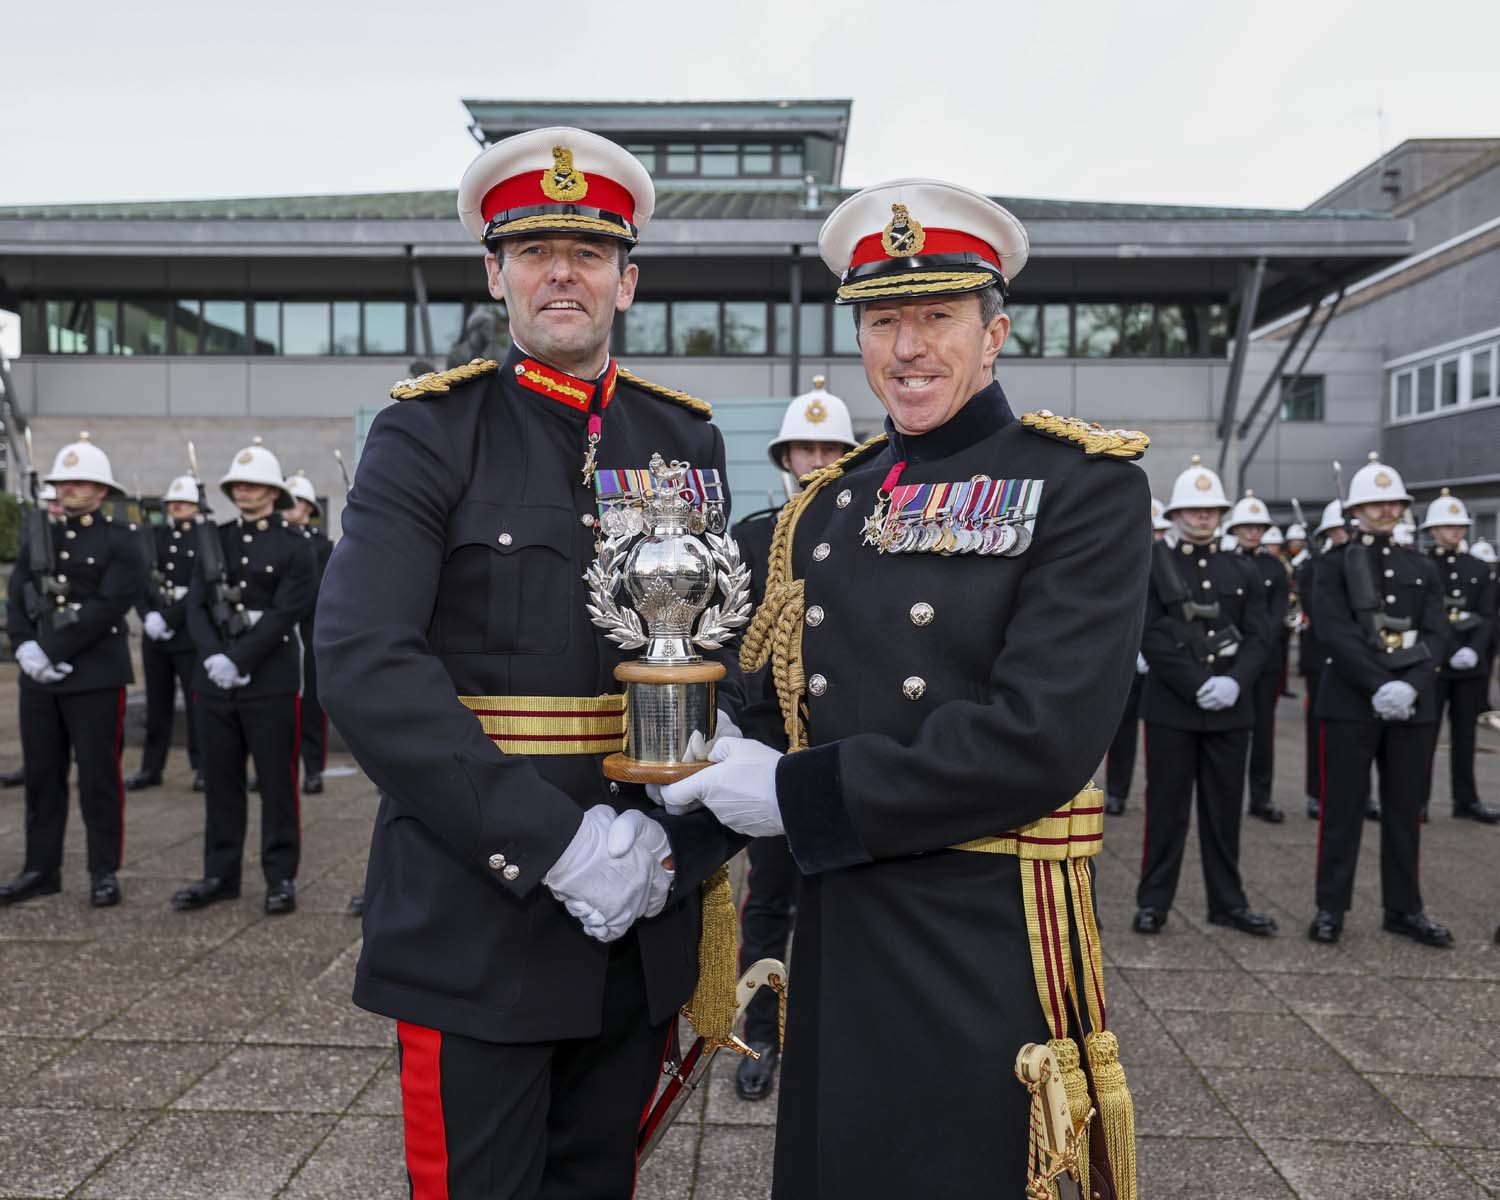 New head of the Royal Marines appointed